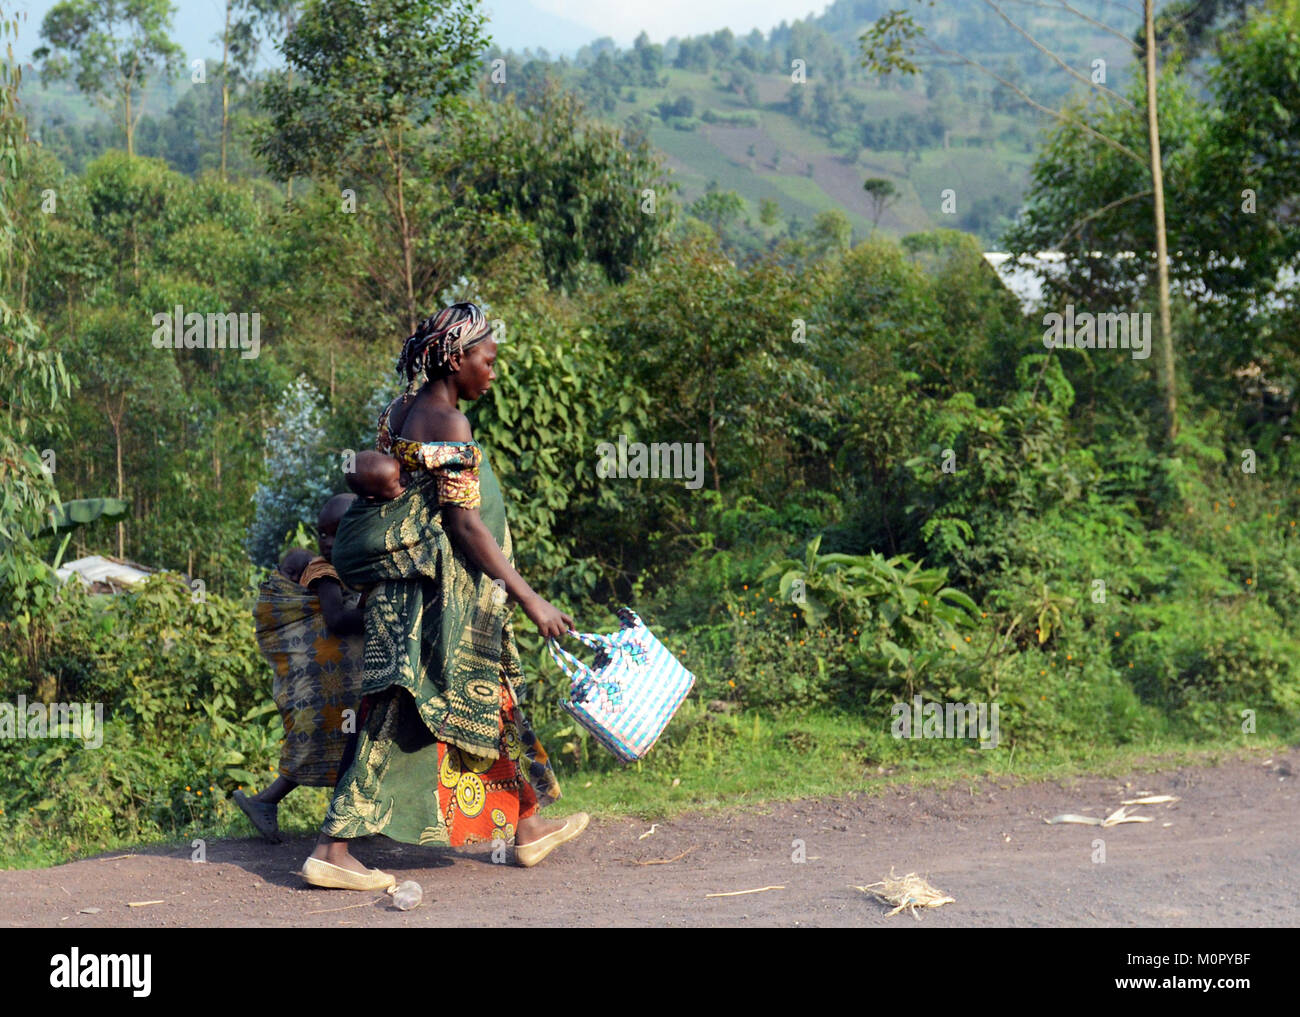 A Congolese woman carrying her baby. Stock Photo